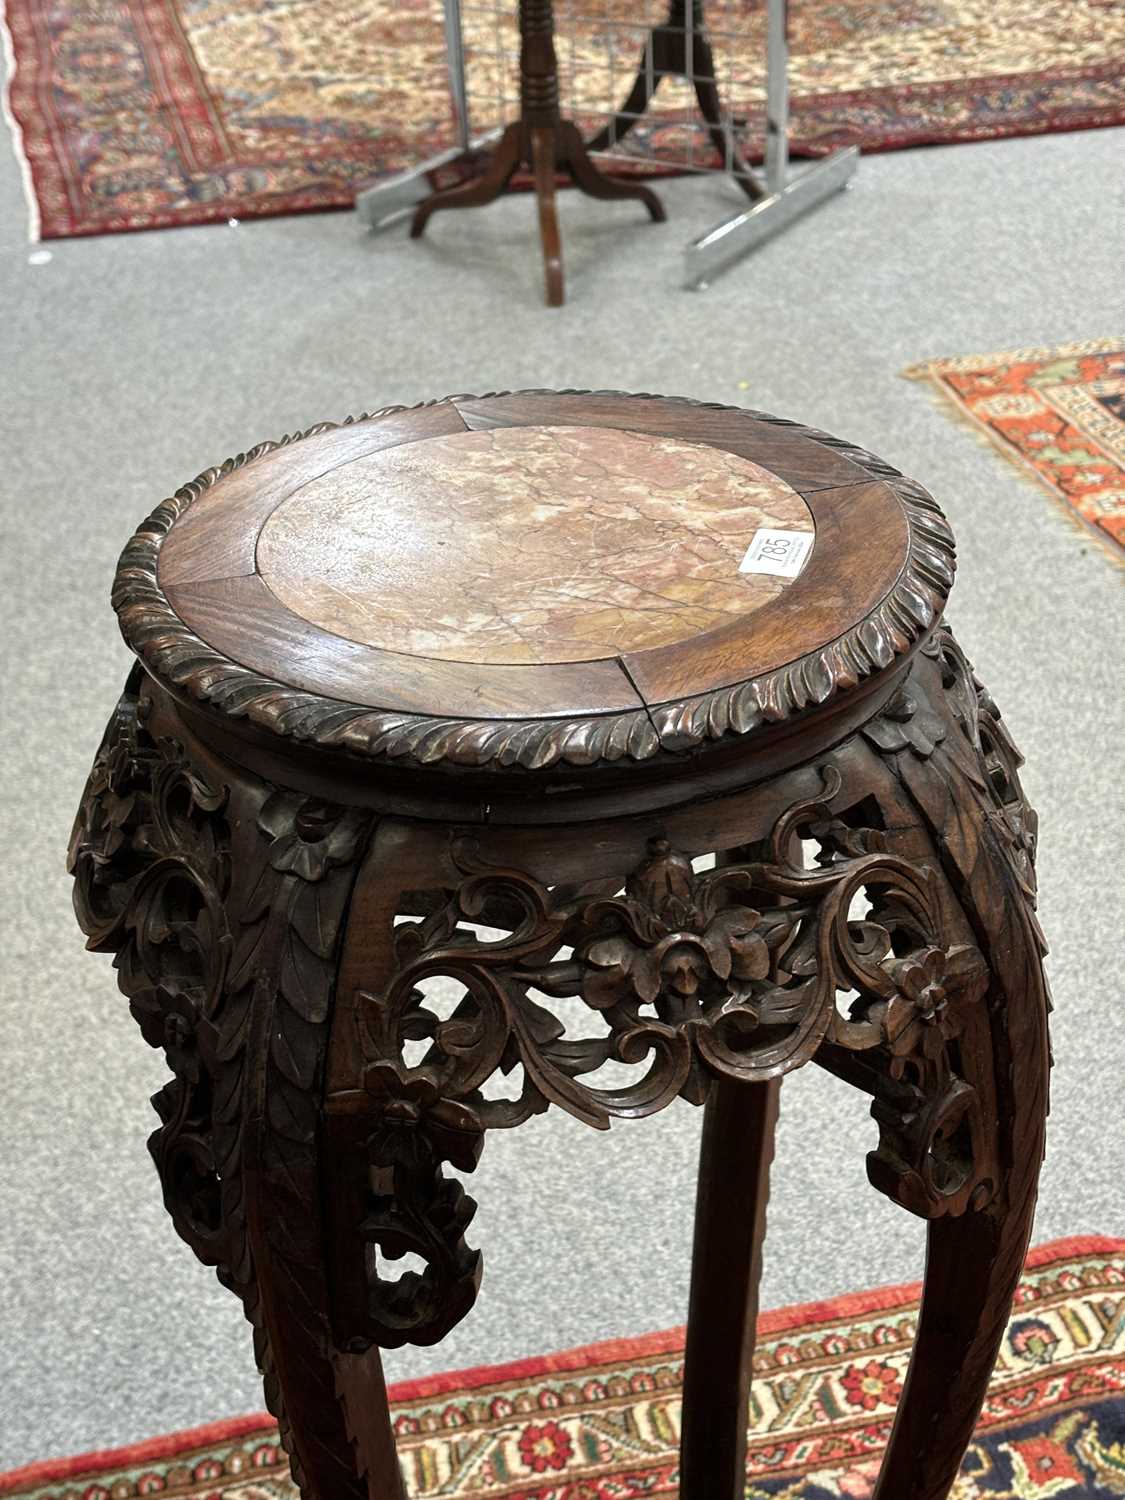 A CHINESE MARBLE-INSET HARDWOOD JARDINIÈRE STAND, 19TH CENTURY - Image 5 of 6